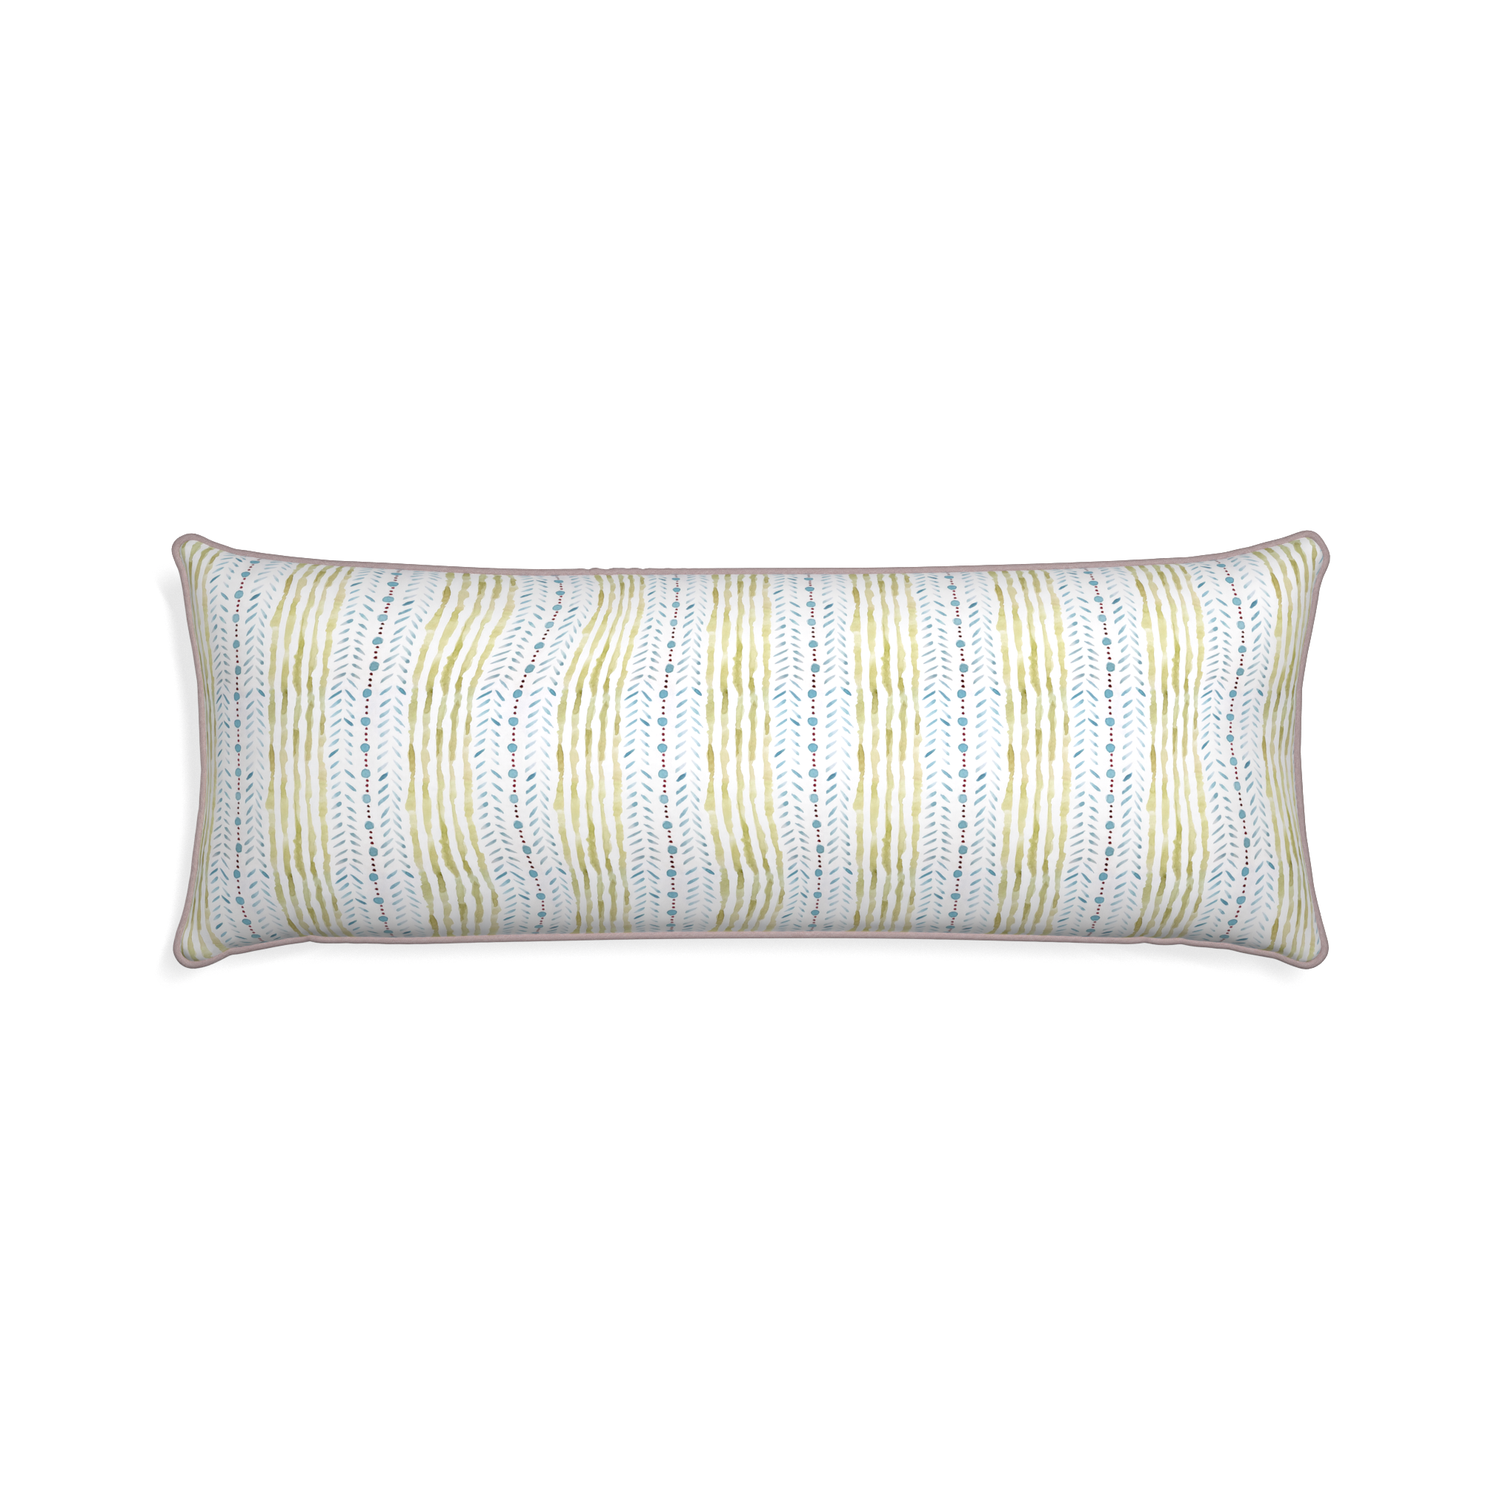 Xl-lumbar julia custom blue & green stripedpillow with orchid piping on white background